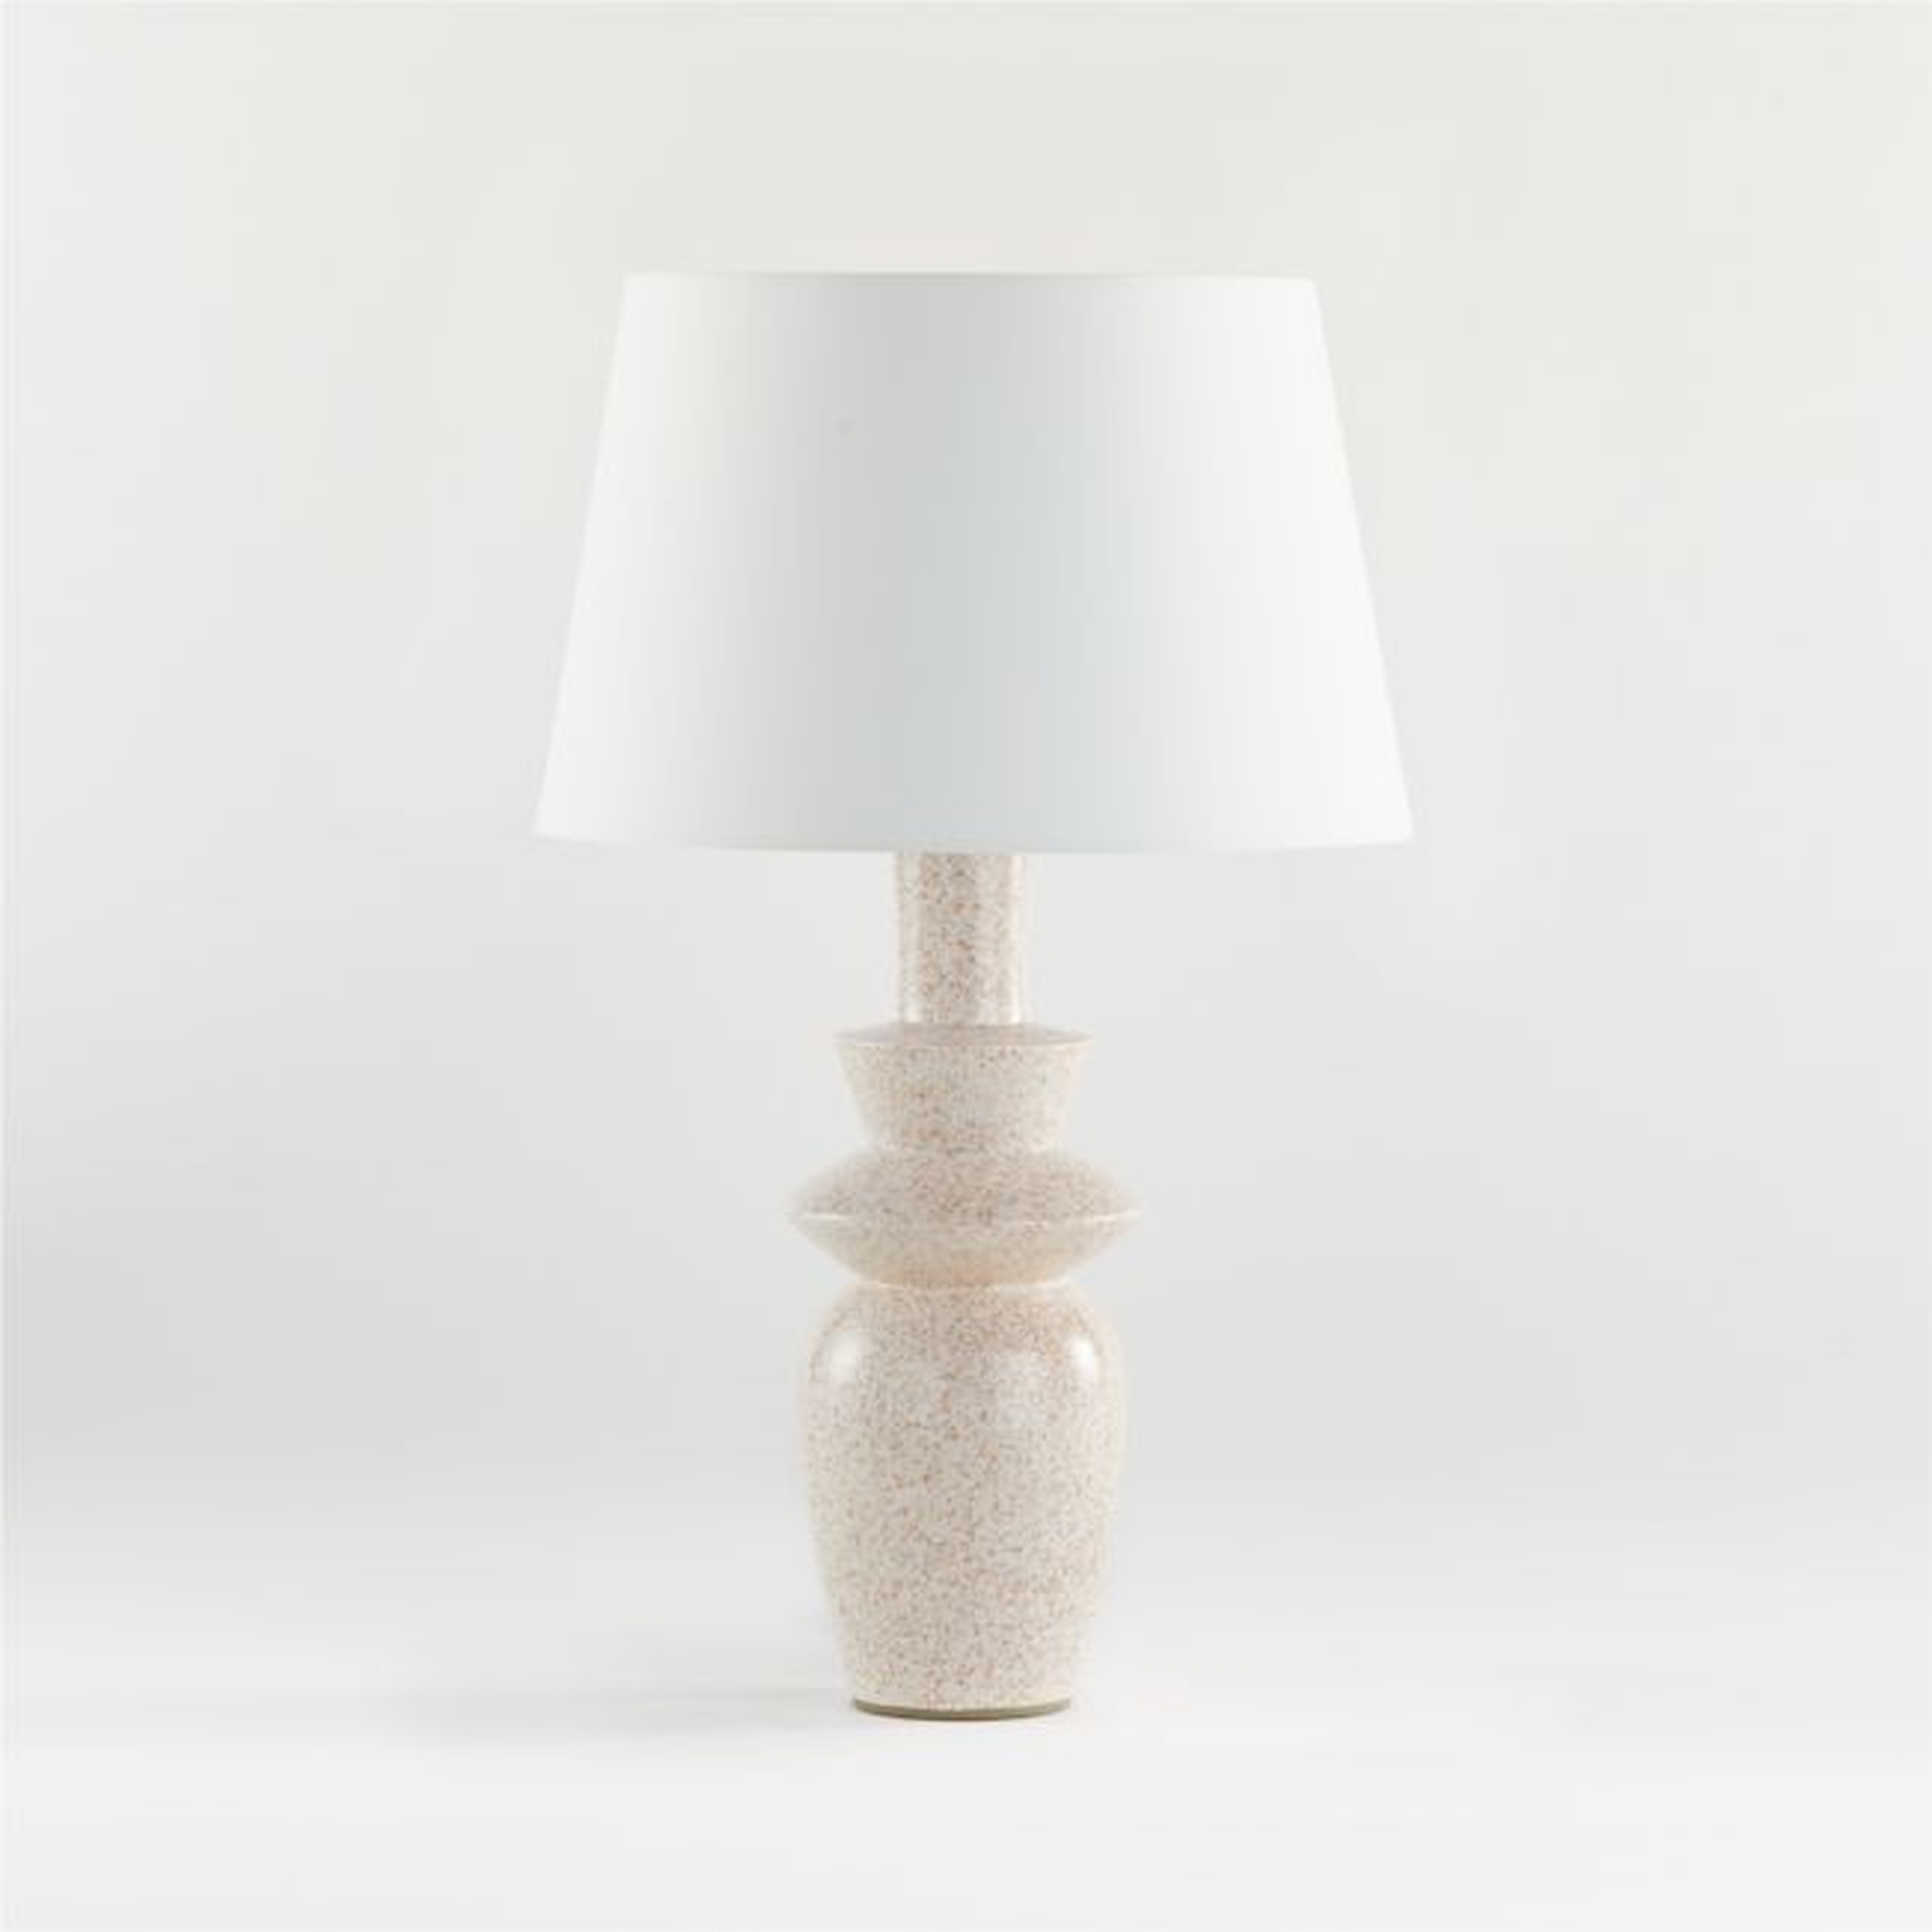 Alina Table Lamp with White Octava Shade - Crate and Barrel